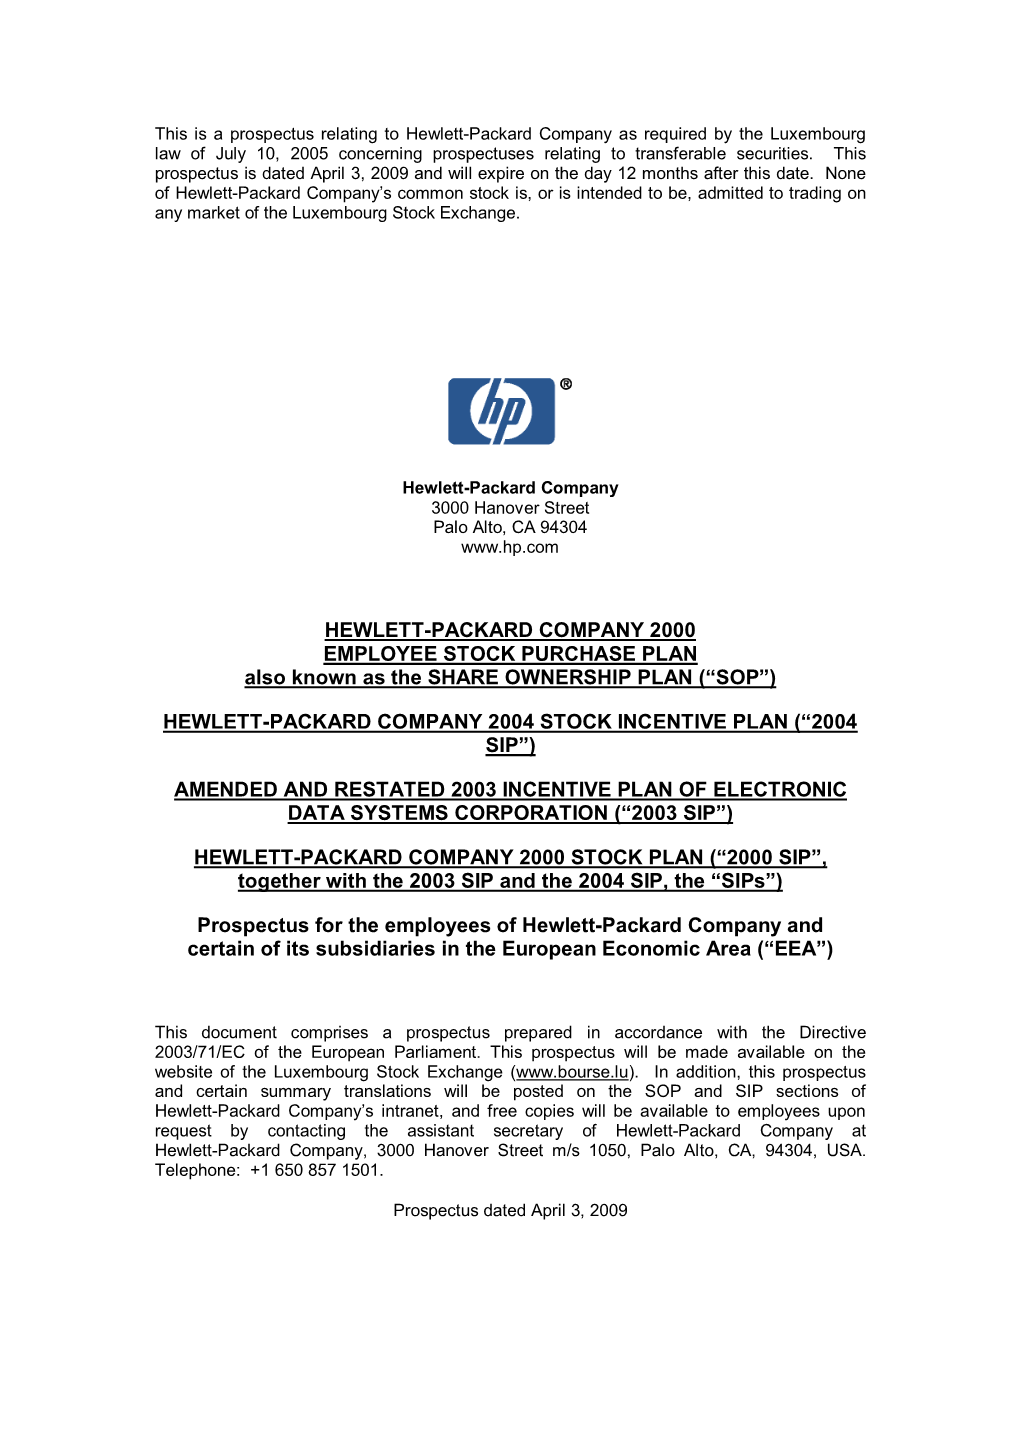 Hewlett-Packard Company As Required by the Luxembourg Law of July 10, 2005 Concerning Prospectuses Relating to Transferable Securities